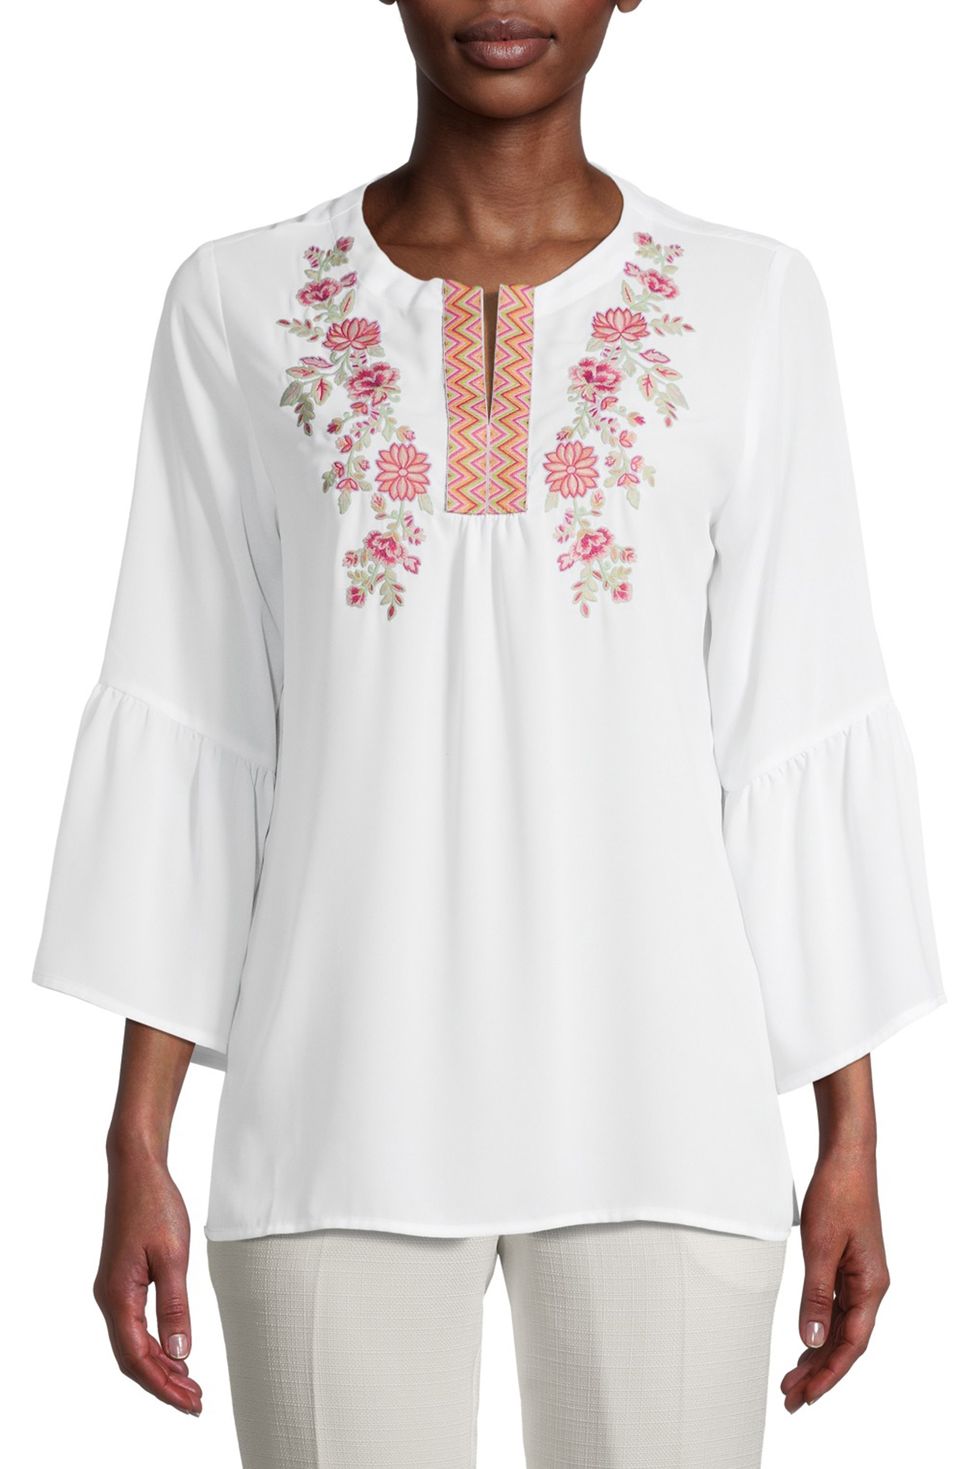 The Pioneer Woman 3/4 Sleeve Embroidered Crepe Blouse